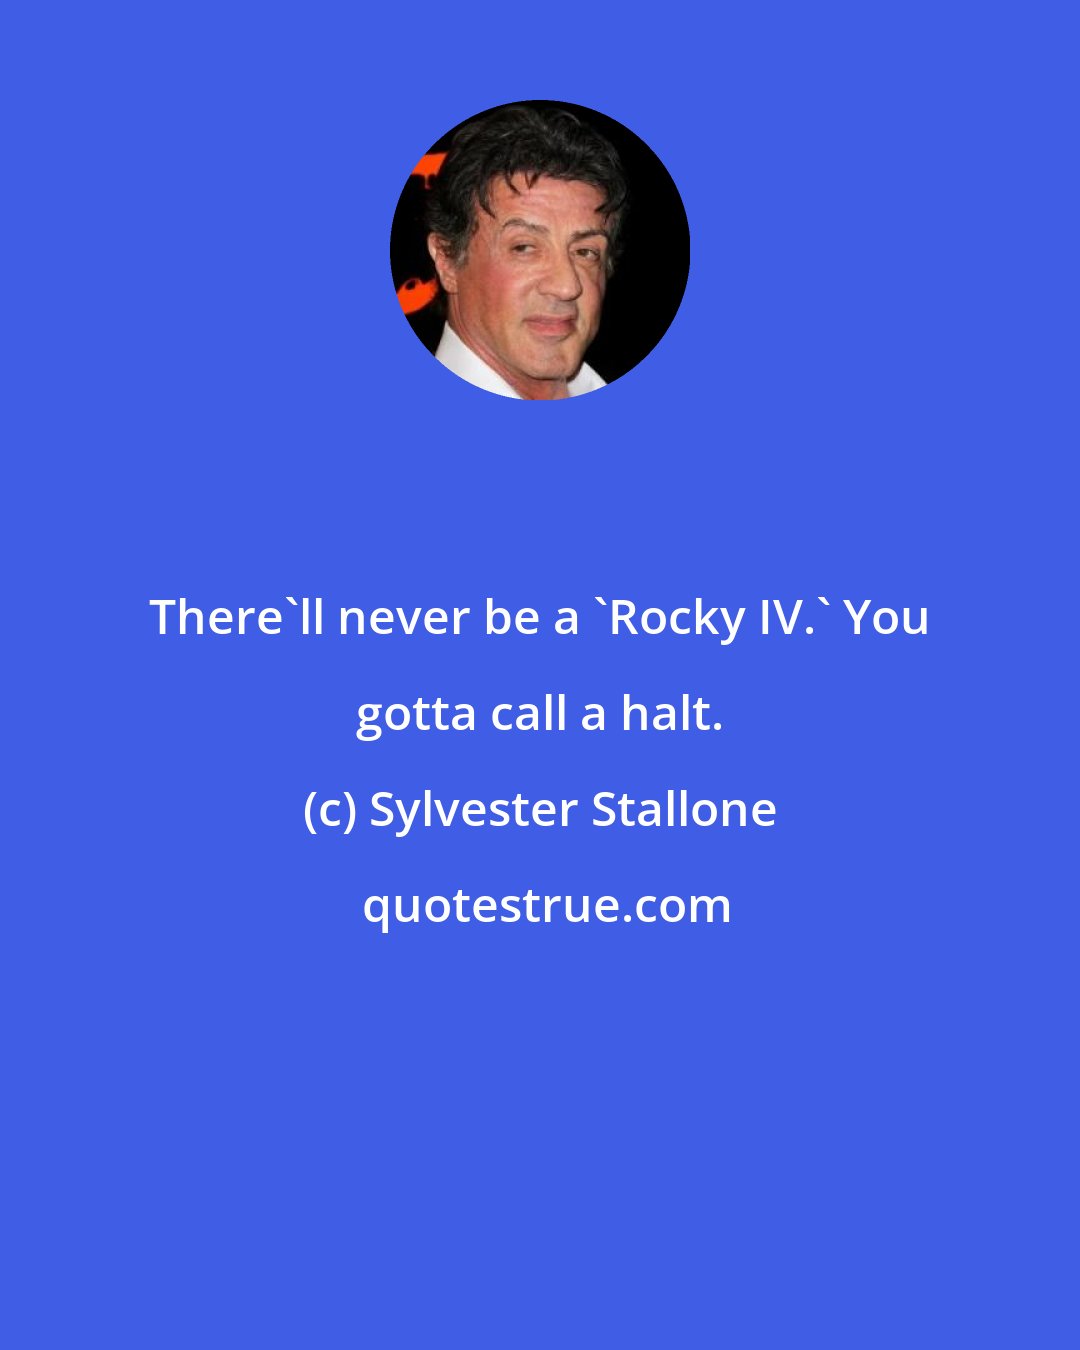 Sylvester Stallone: There'll never be a 'Rocky IV.' You gotta call a halt.